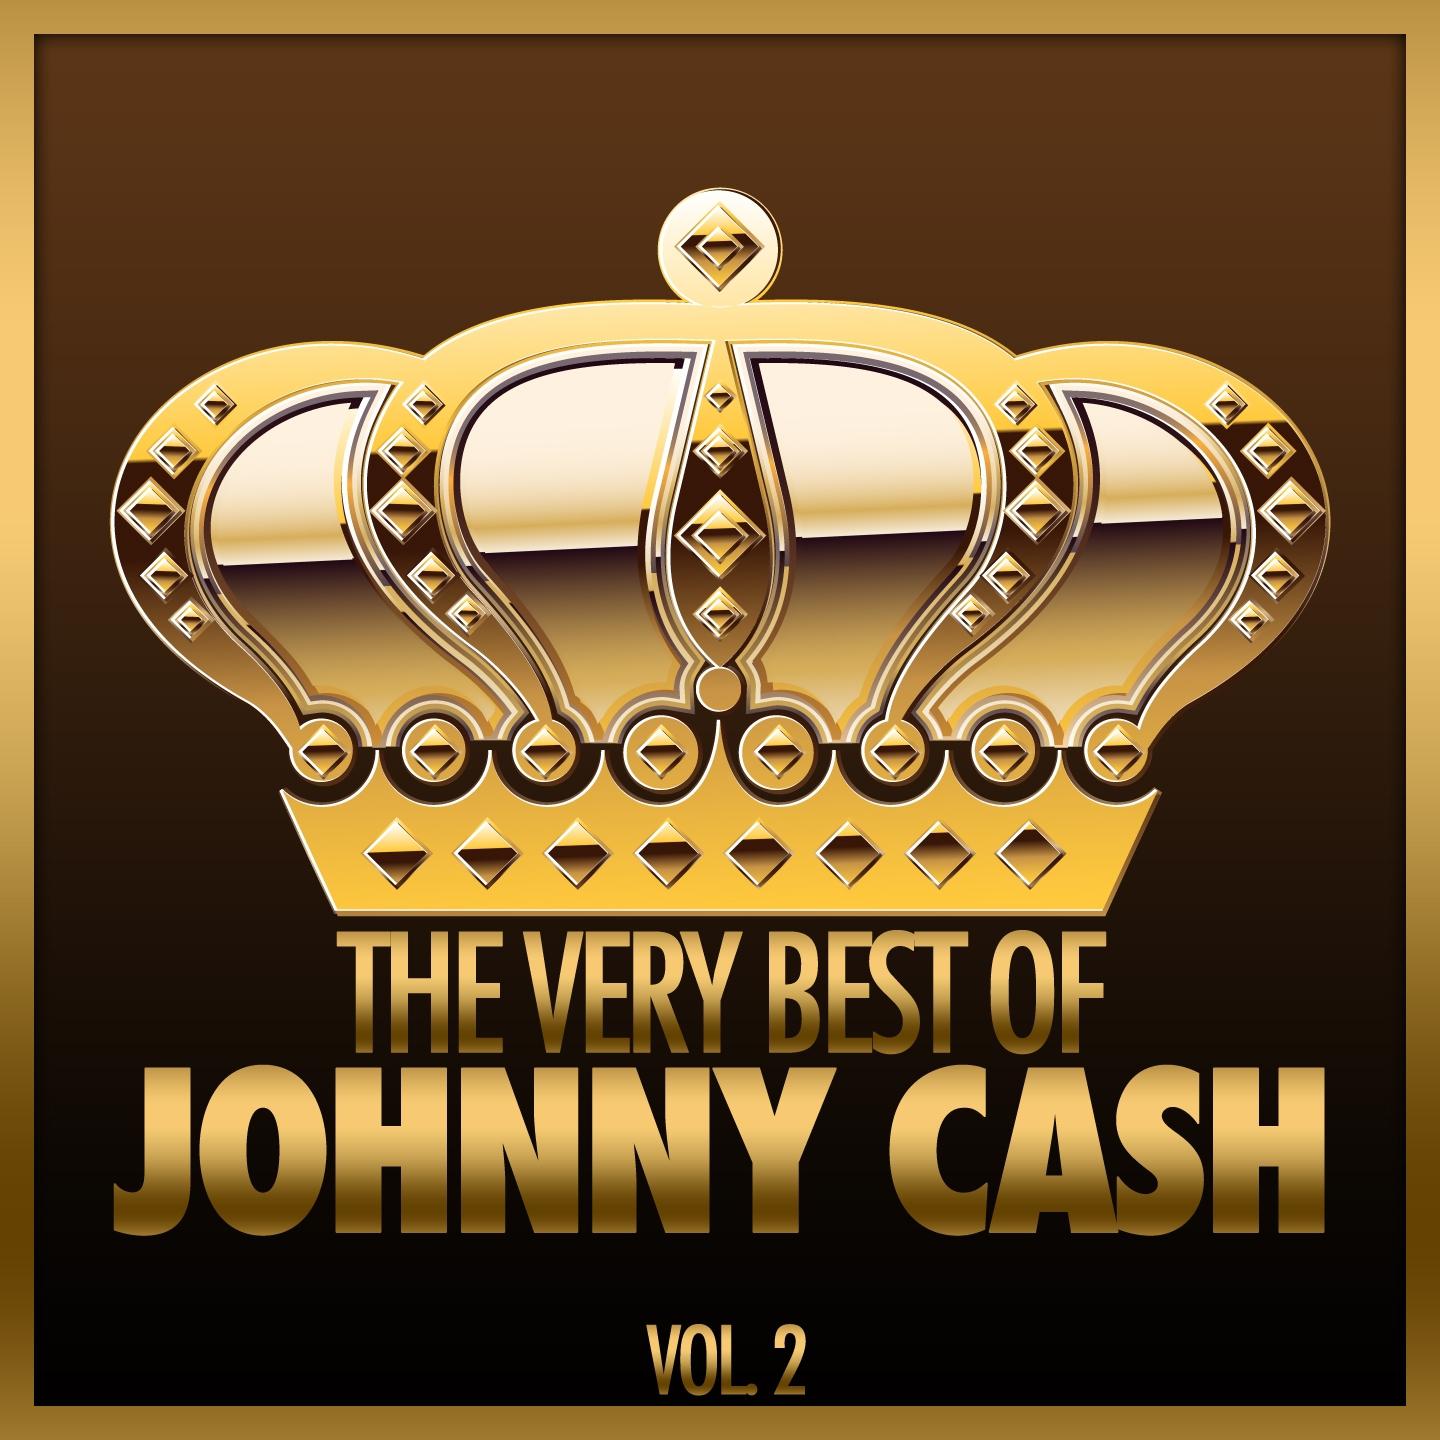 The Very Best Of Johnny Cash, Vol. 2